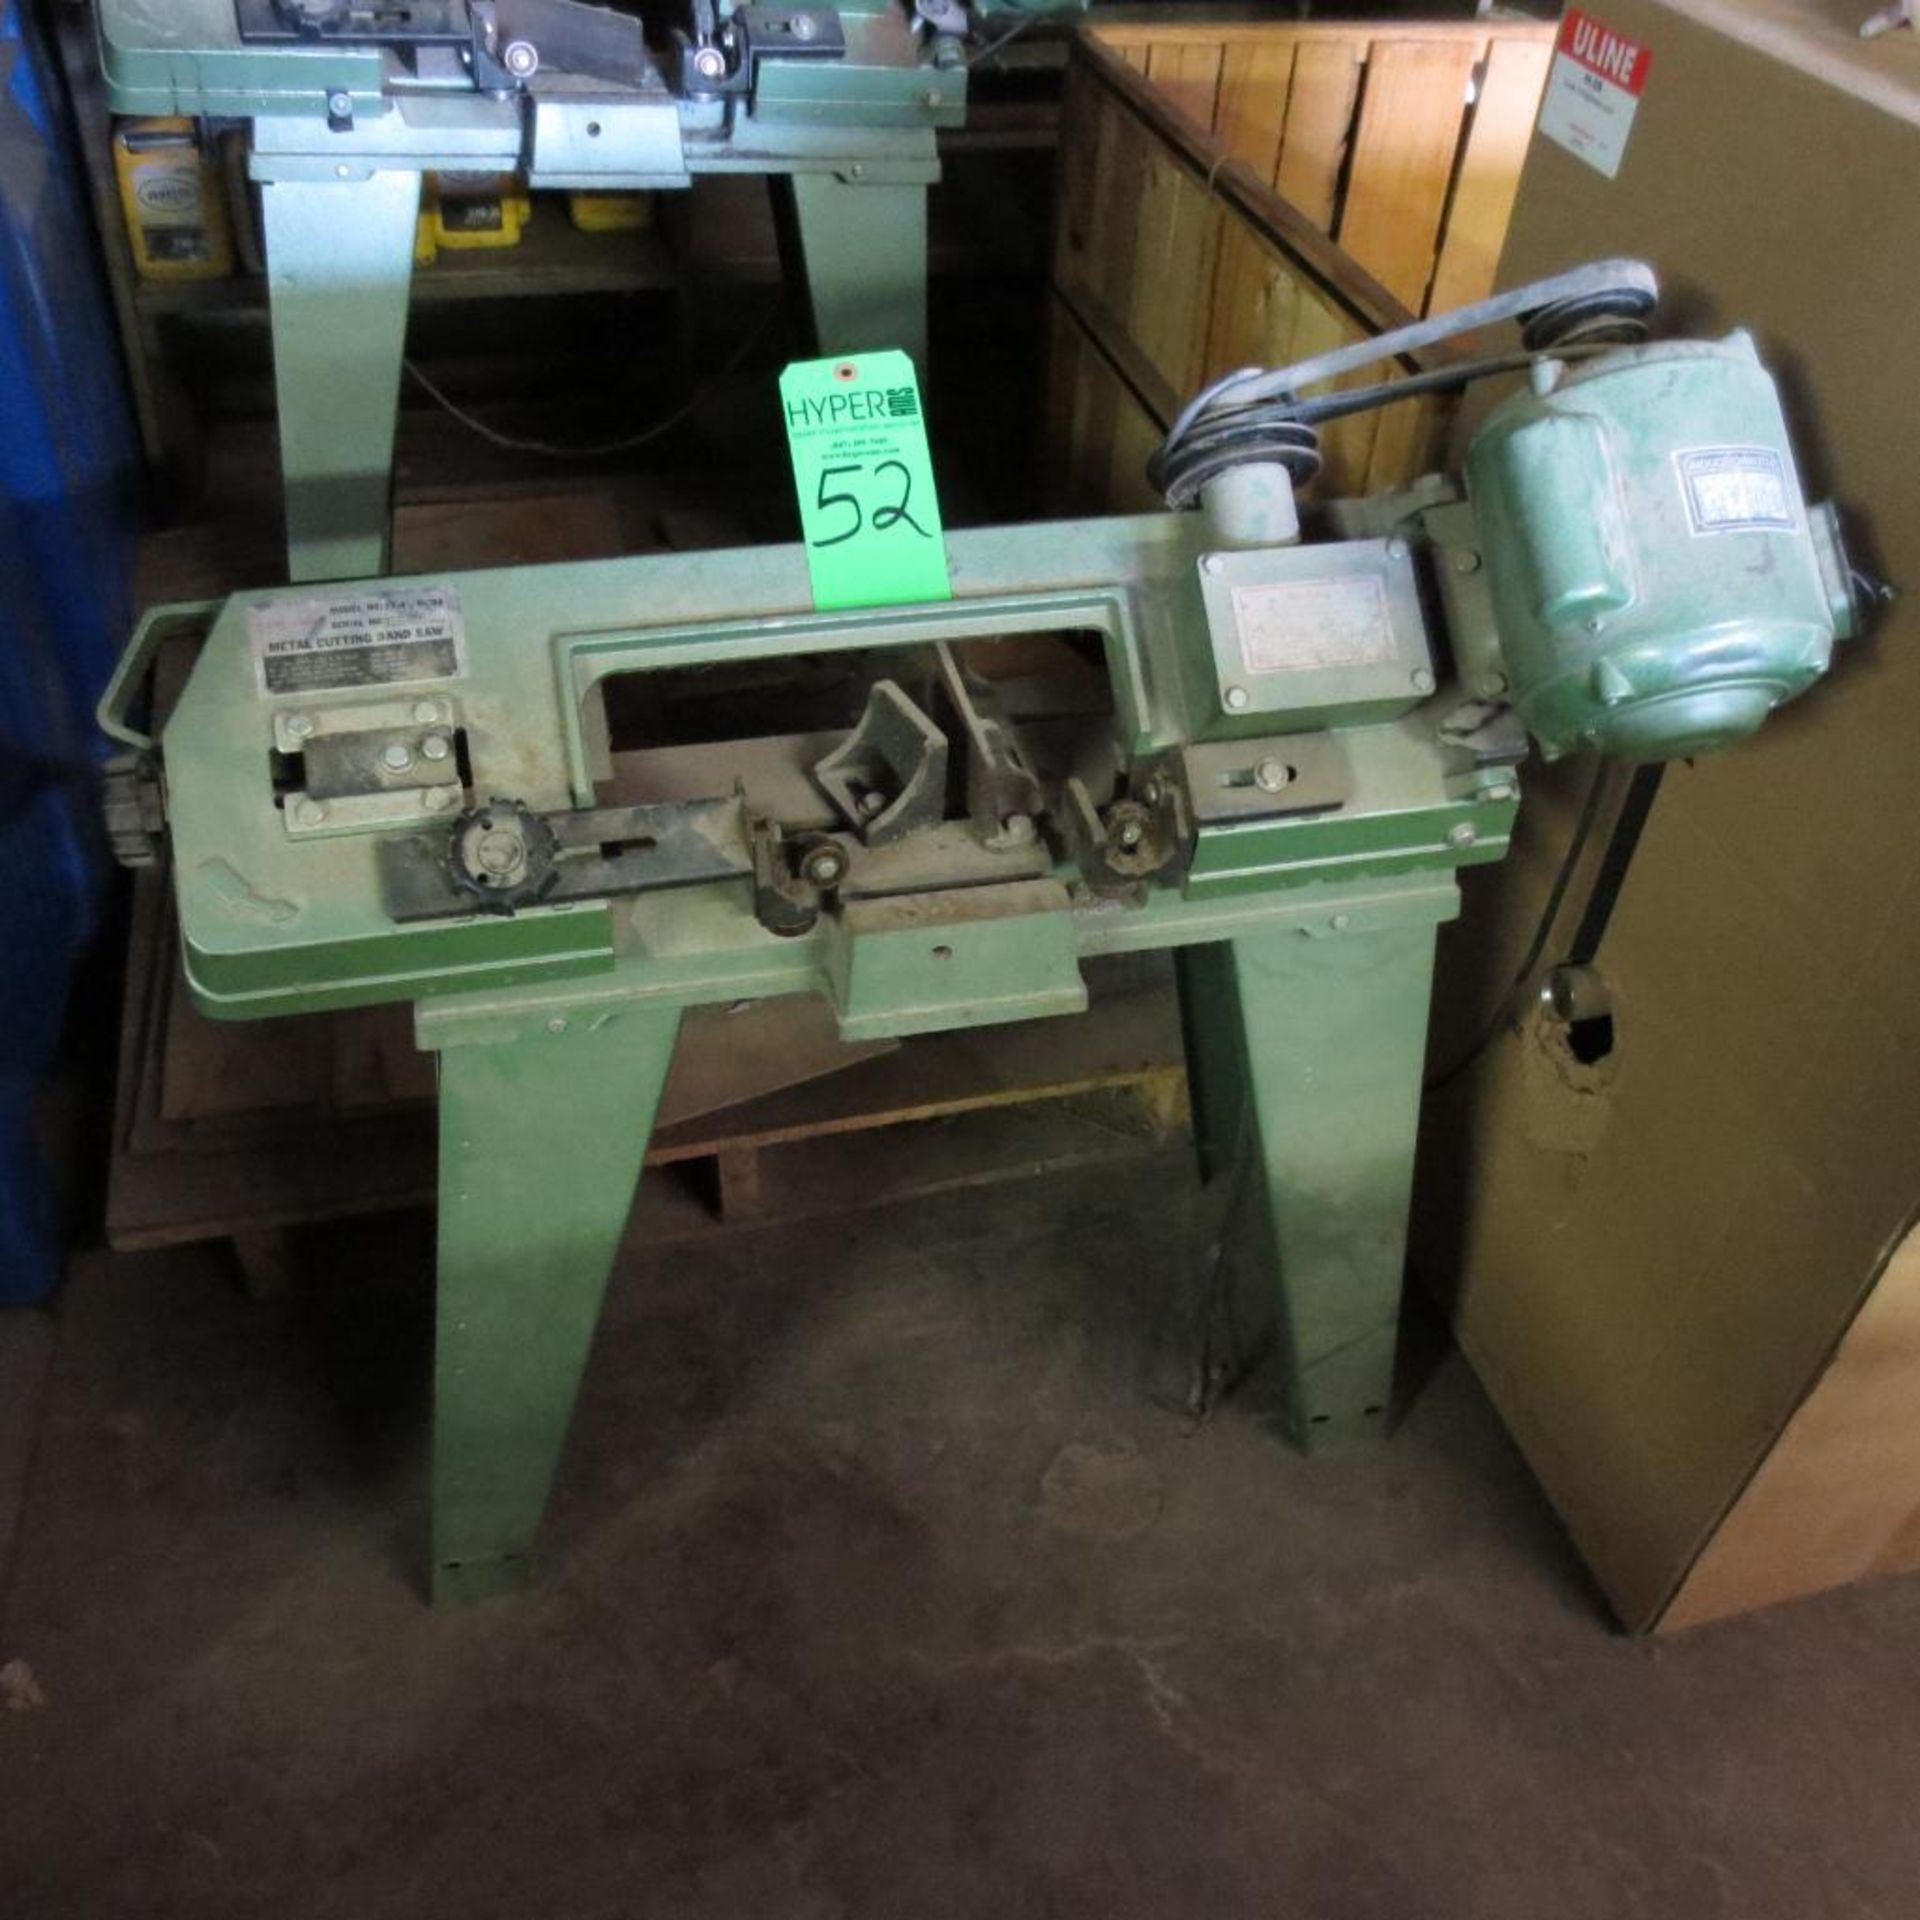 Cal Hawk Band Saw, Model CT 4 1/2 MCBS, S/N 9701249, Cutting Cap 4 1/2"rd X 6" rect, Bed With 8", Ho